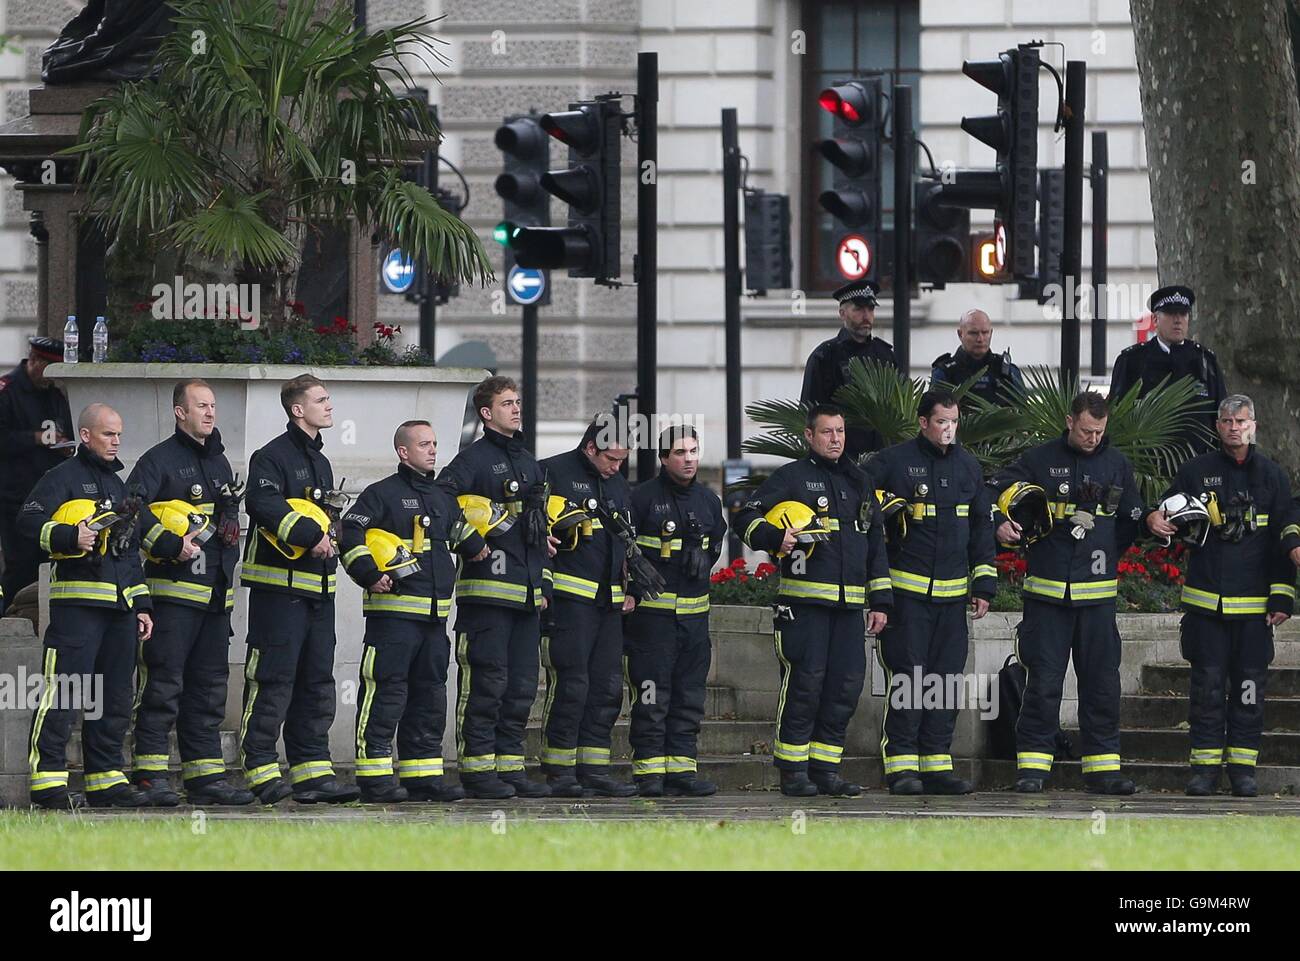 Members of the London Fire Brigade pay their respects after the King's Troop Royal Horse Artillery fire First World War guns in Parliament Square, London, to mark the end of the vigil at the grave of the Unknown Warrior in Westminster Abbey, as the nation honours thousands of soldiers killed in the Battle of the Somme, 100 years after its bloody beginning. Stock Photo